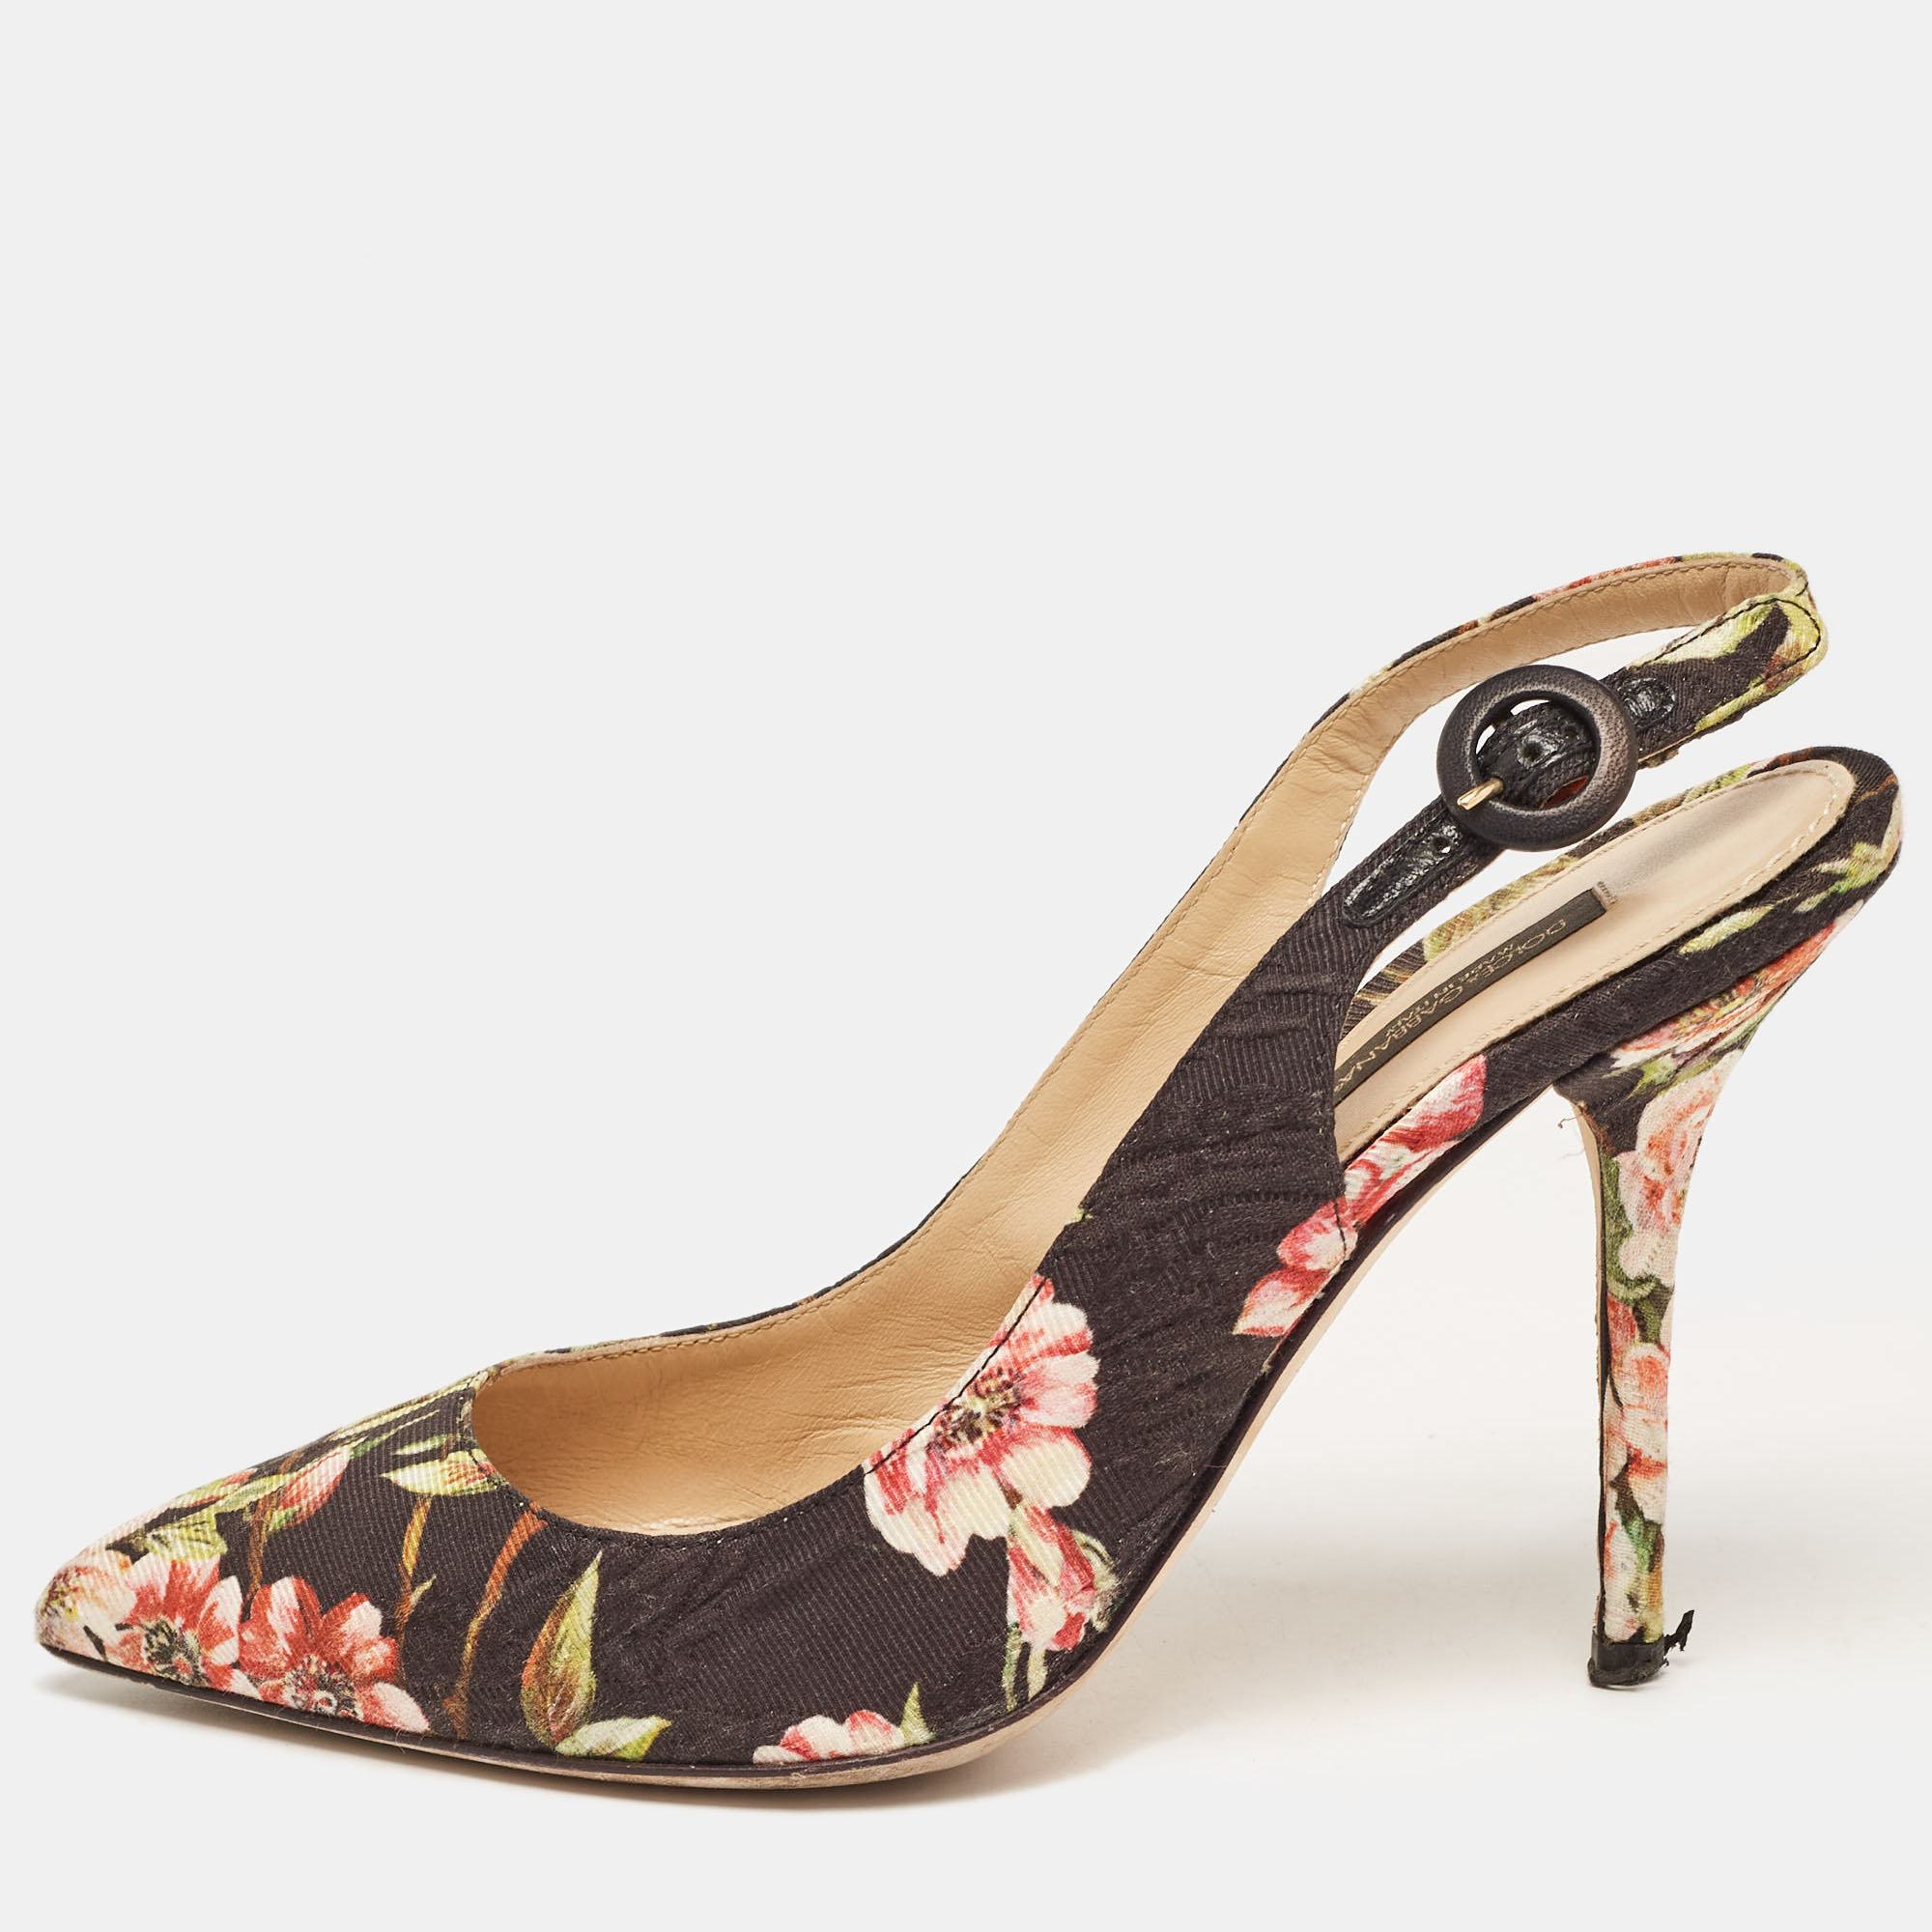 

Dolce & Gabbana Multicolor Floral Print Brocade Slingback Pointed Toe Pumps Size